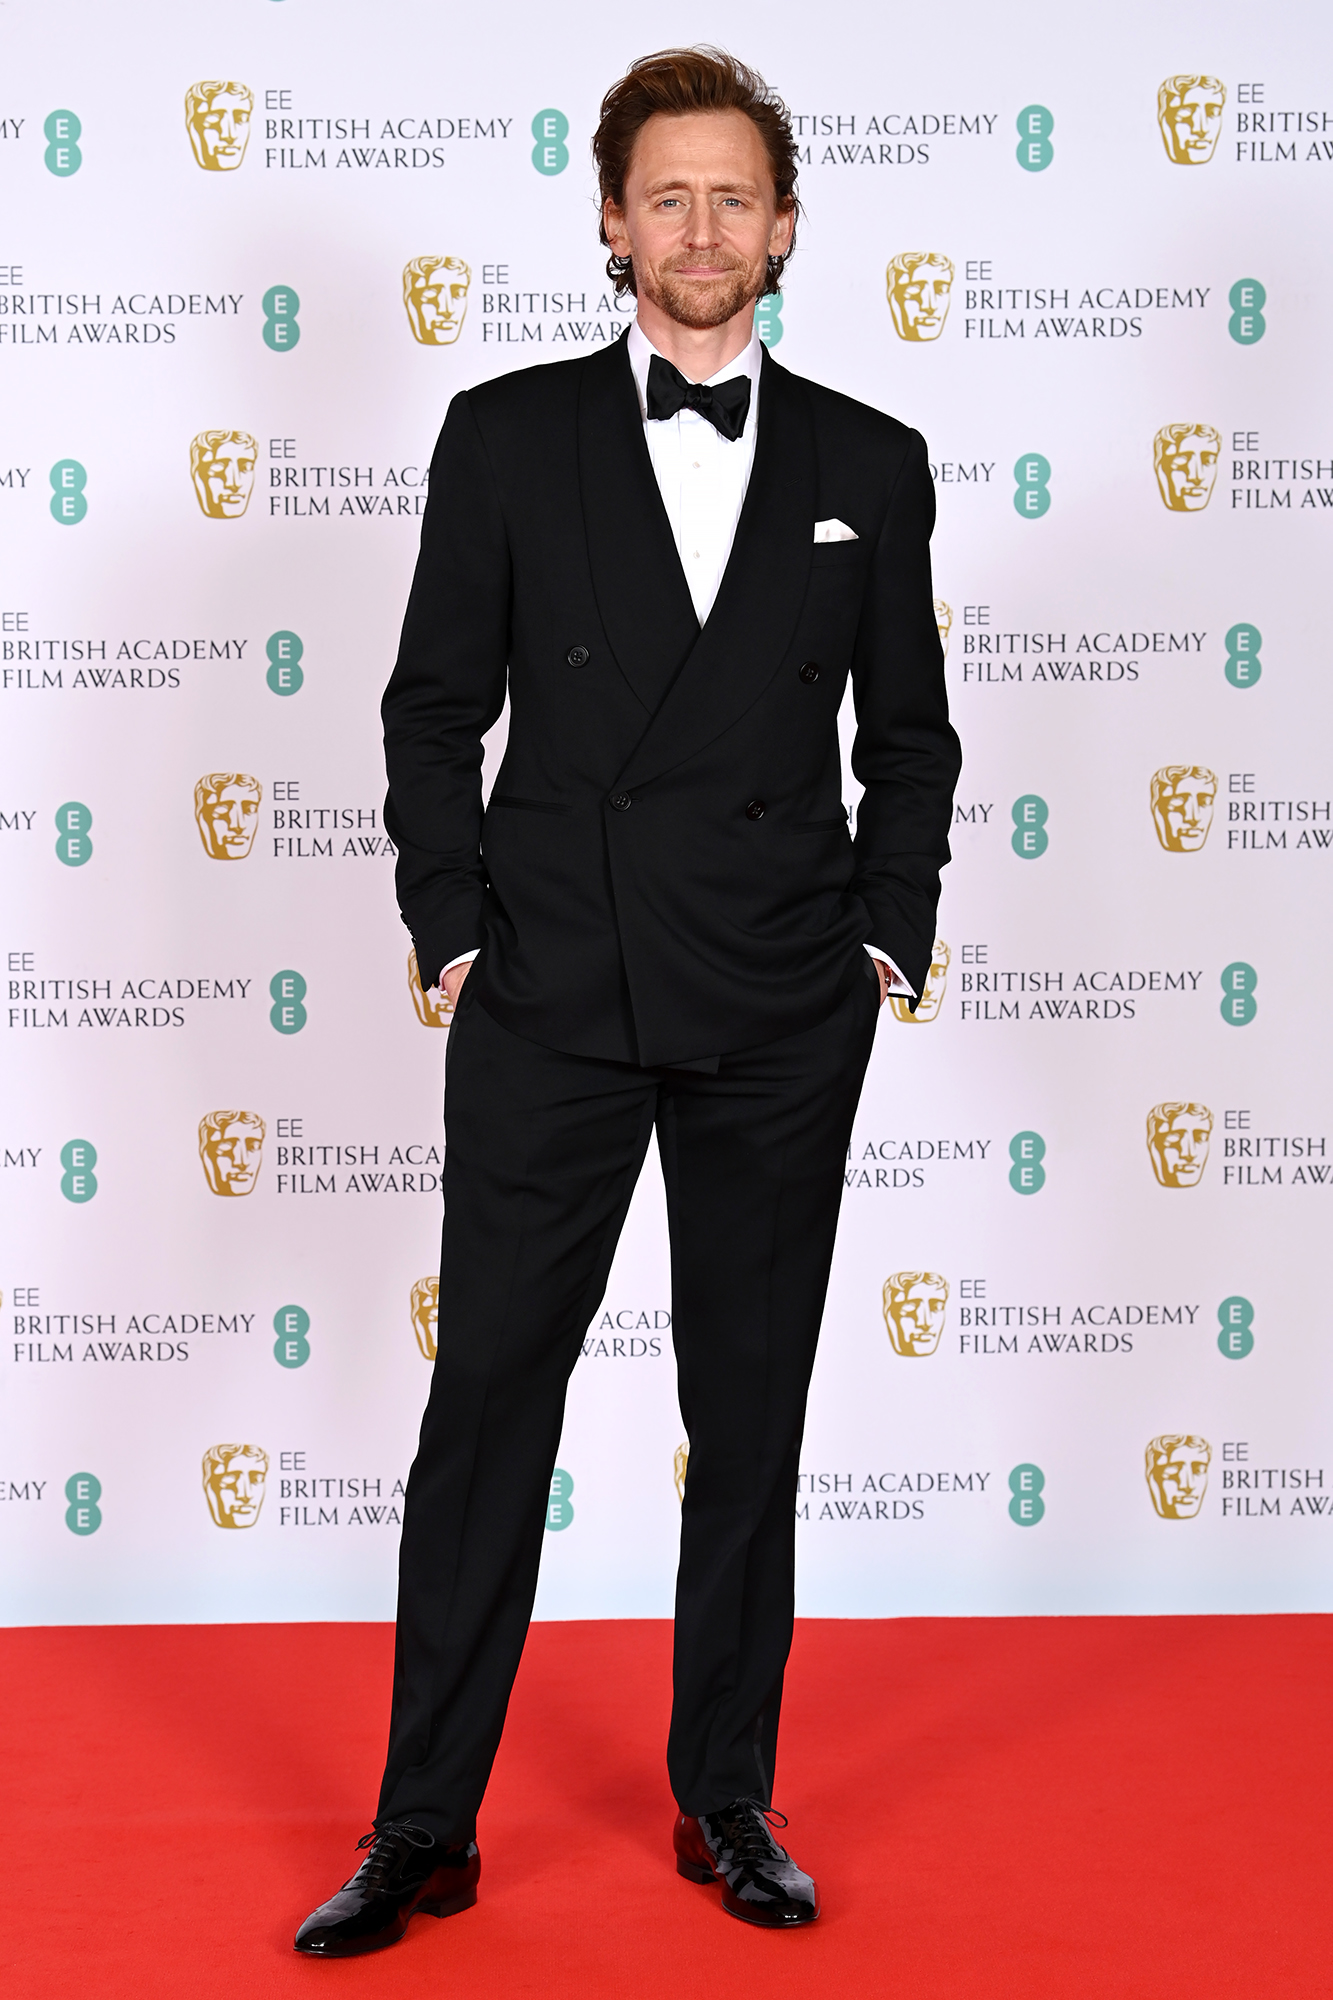 BAFTAs 2021 Red Carpet Fashion: What the Stars Wore